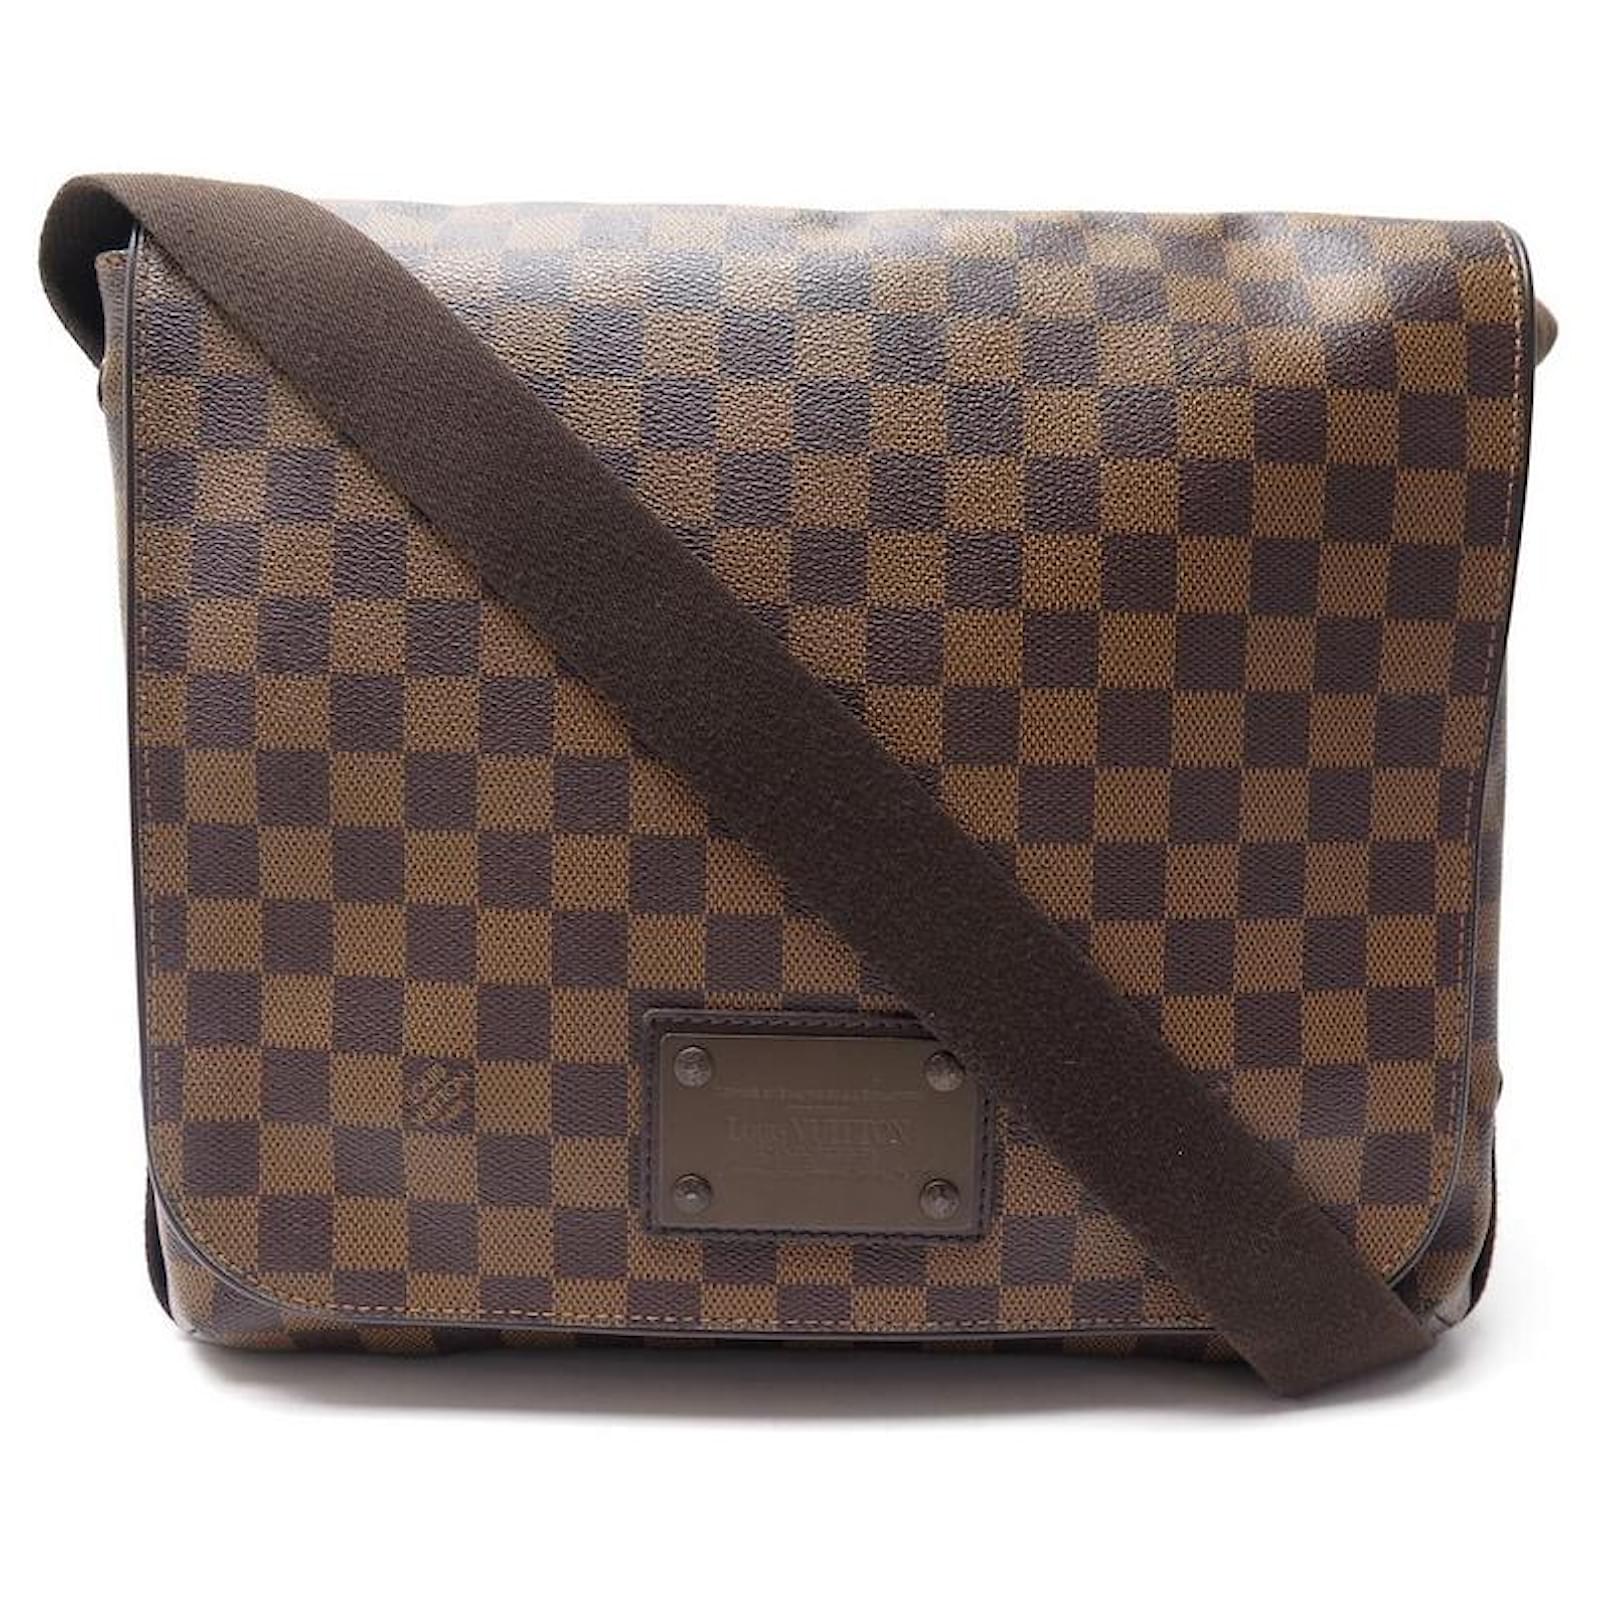 Louis Vuitton, Bags, Types Of Bags